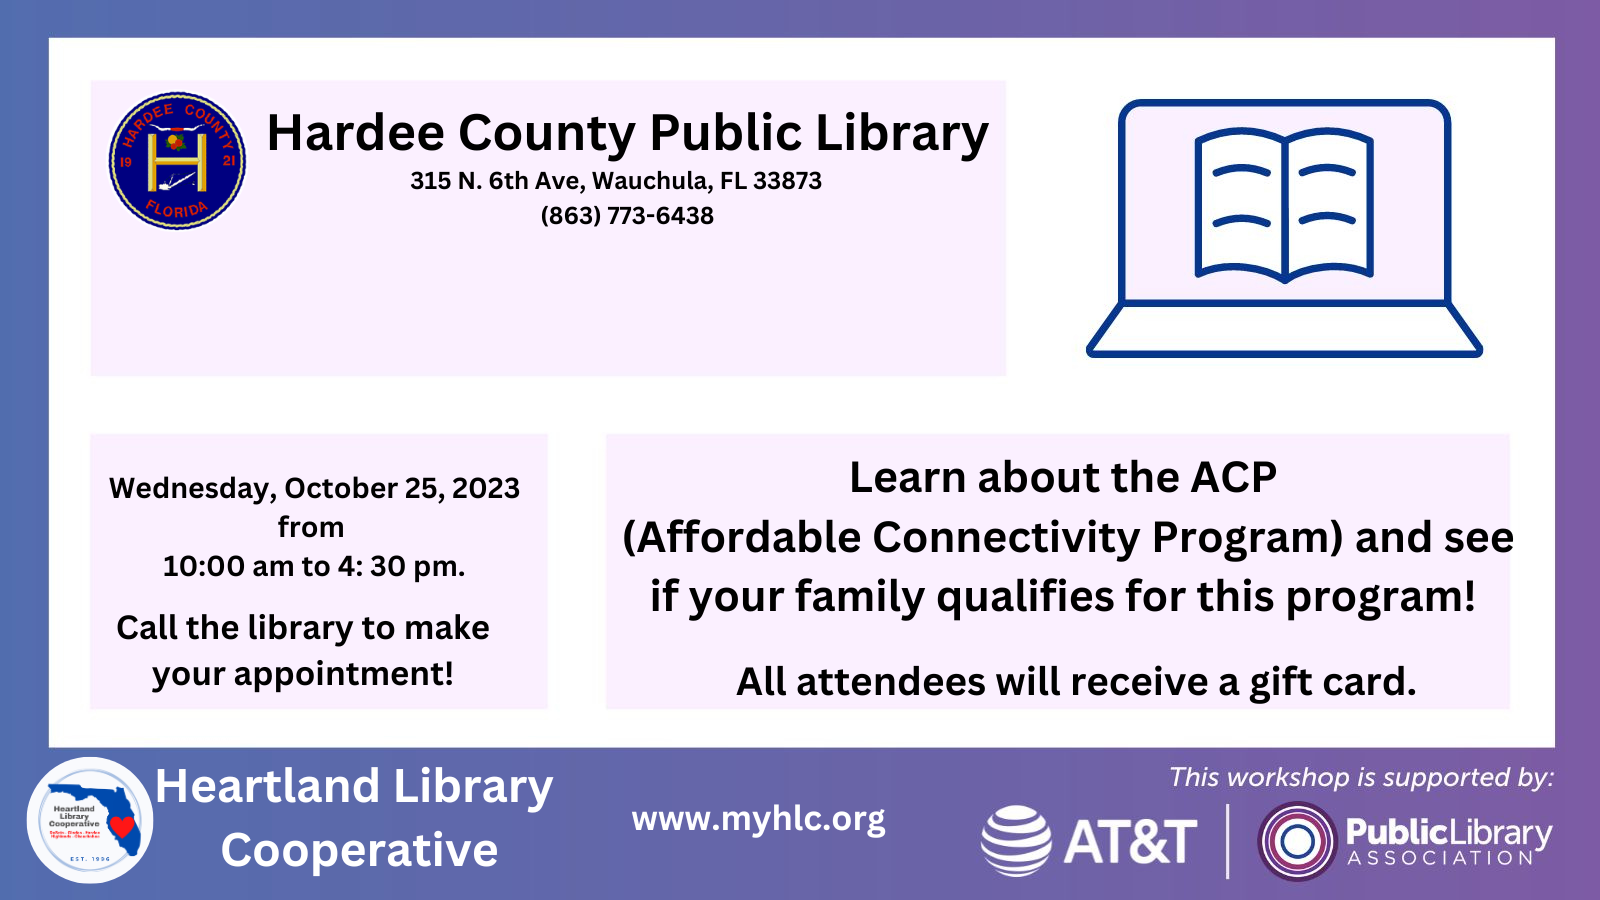 If you would like assistance in applying for the ACP or Affordable Connectivity Program, schedule an appointment with the Hardee County Library on Wednesday, October 25, 2023 between 10 a.m. and 4:30 p.m. by calling 863-7736438. More information about the ACP below. 